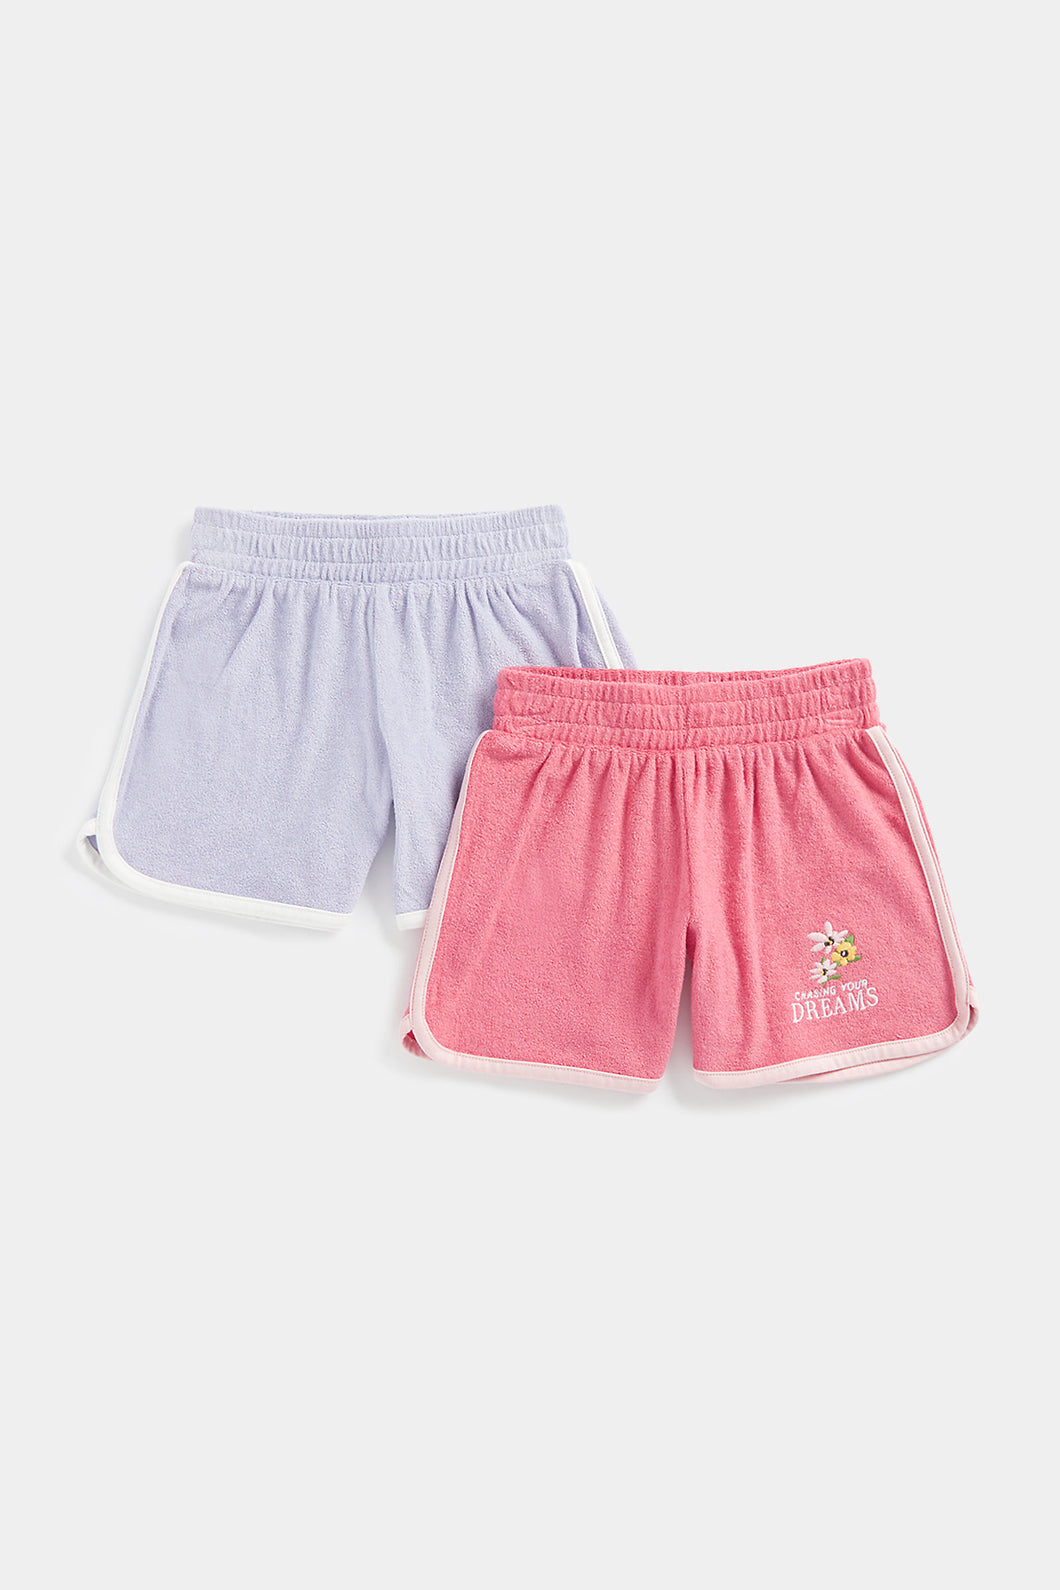 Mothercare Towelling Shorts - 2 Pack